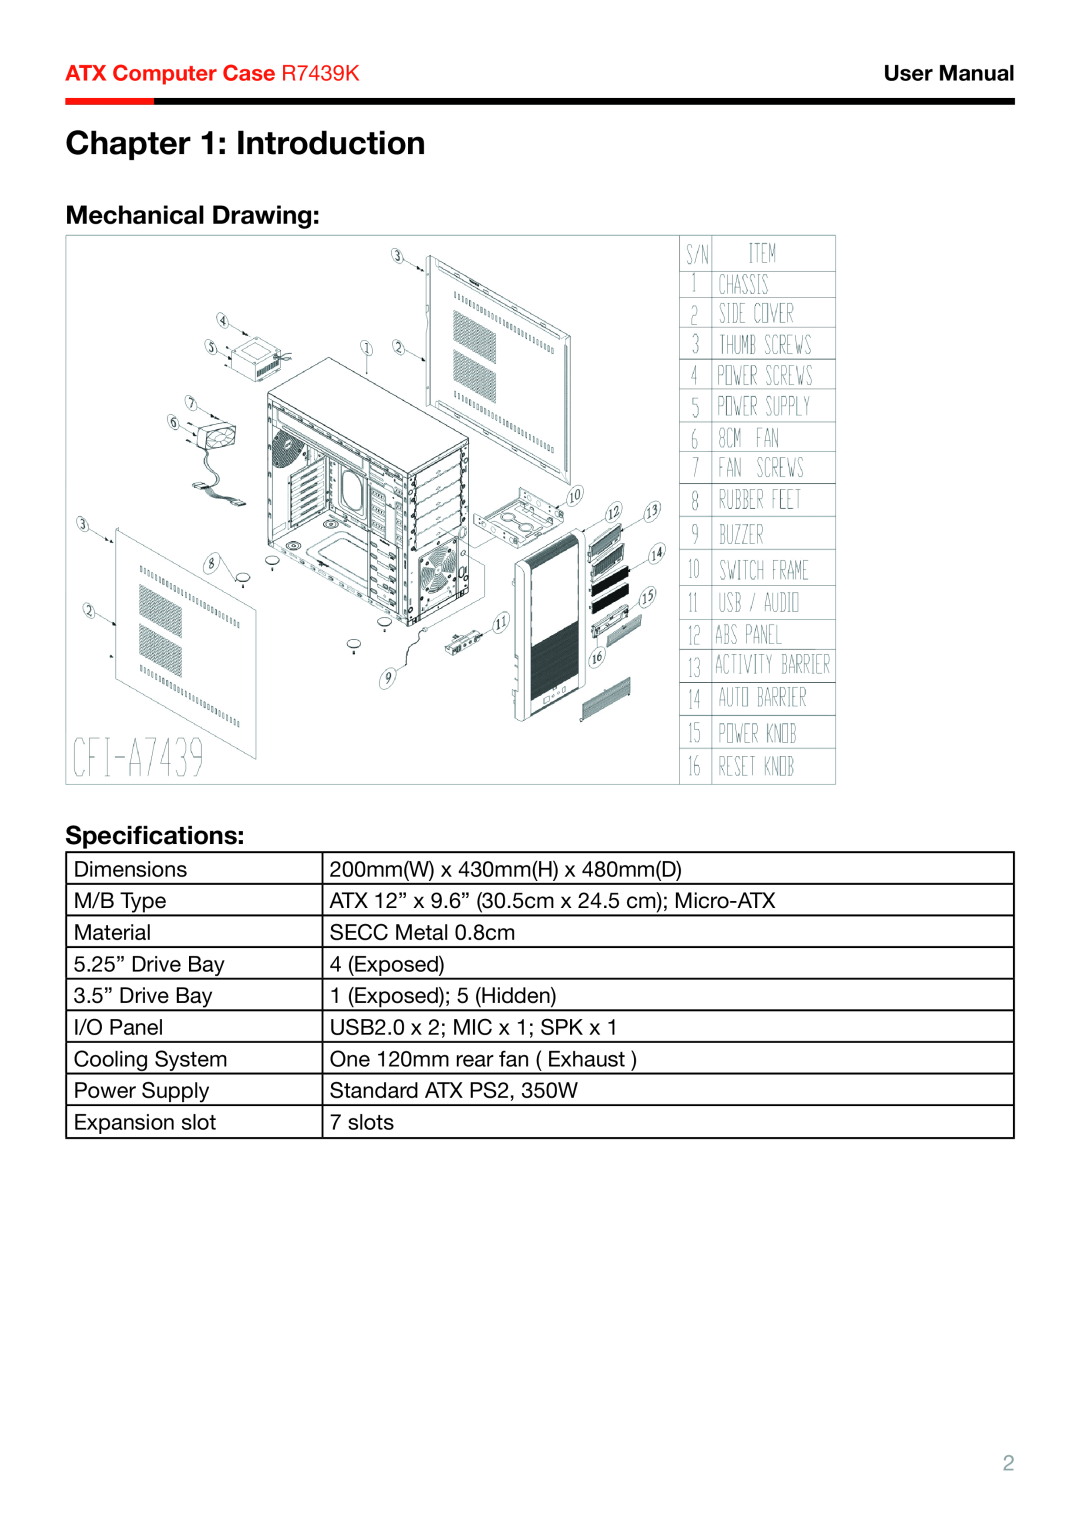 Rosewill user manual Introduction, Mechanical Drawing Speciﬁcations, User Manual, ATX Computer Case R7439K 